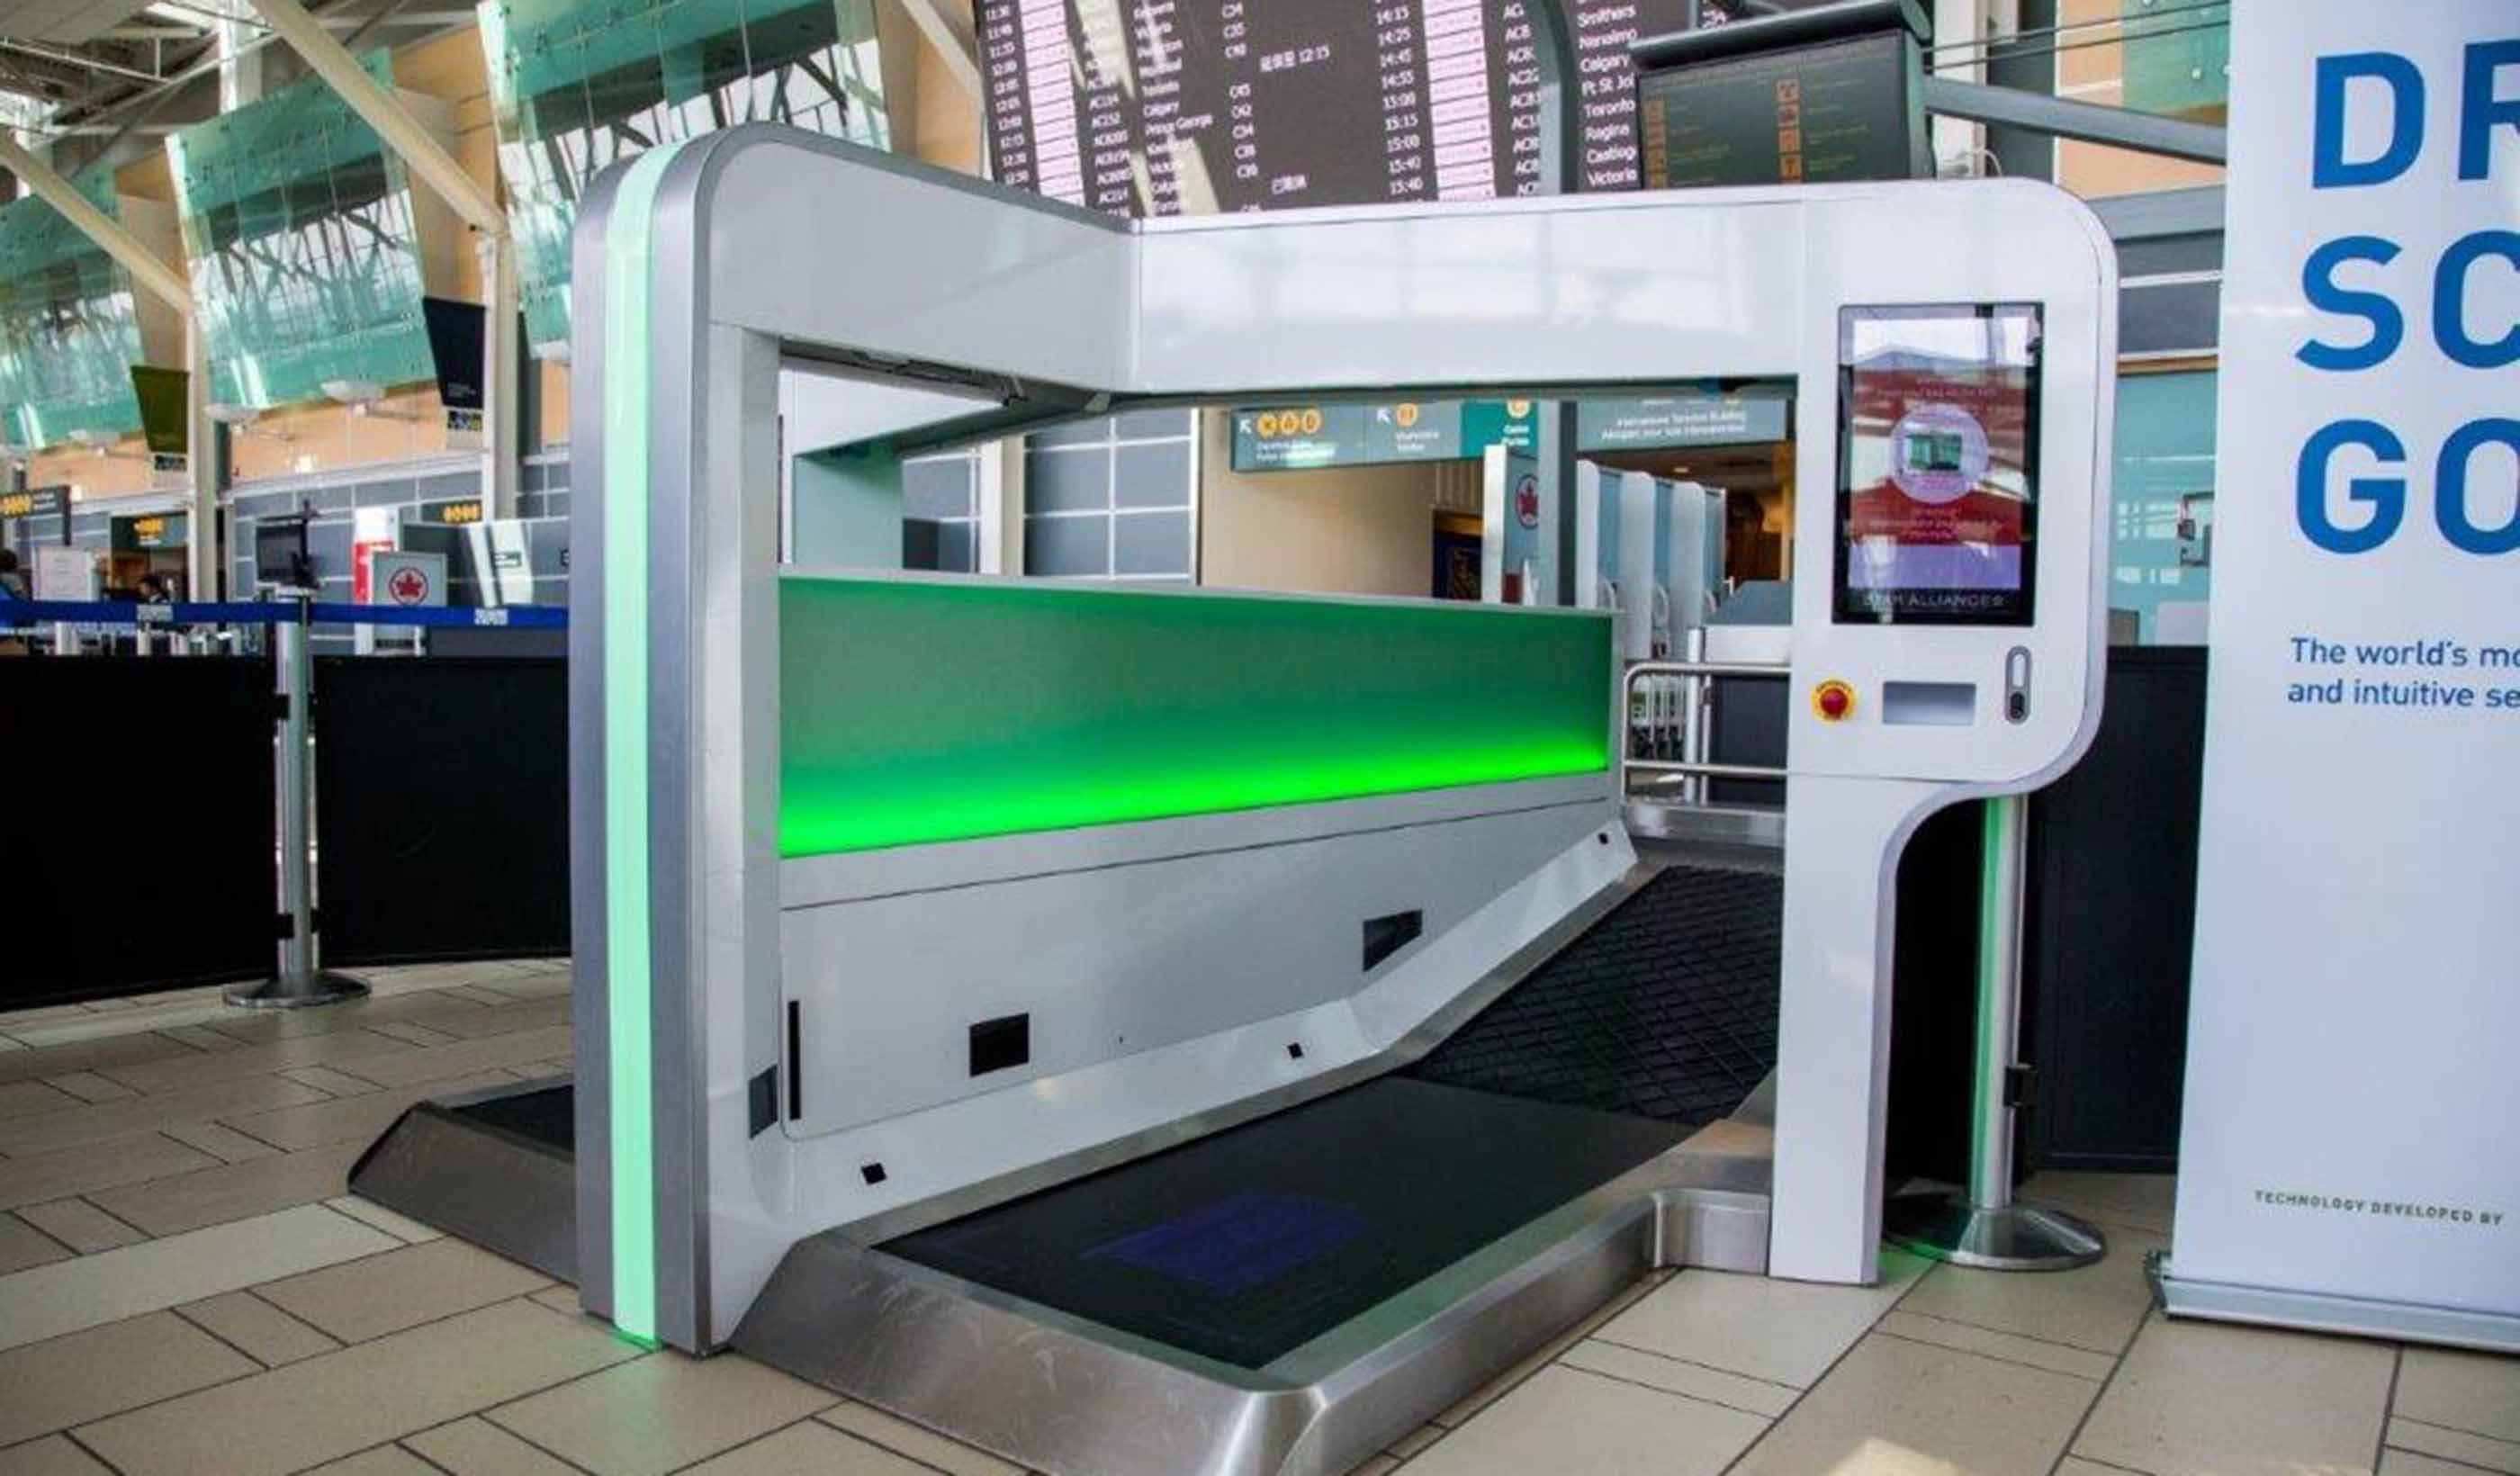 If history is our guide, then COVID-19 will improve airport baggage check-in